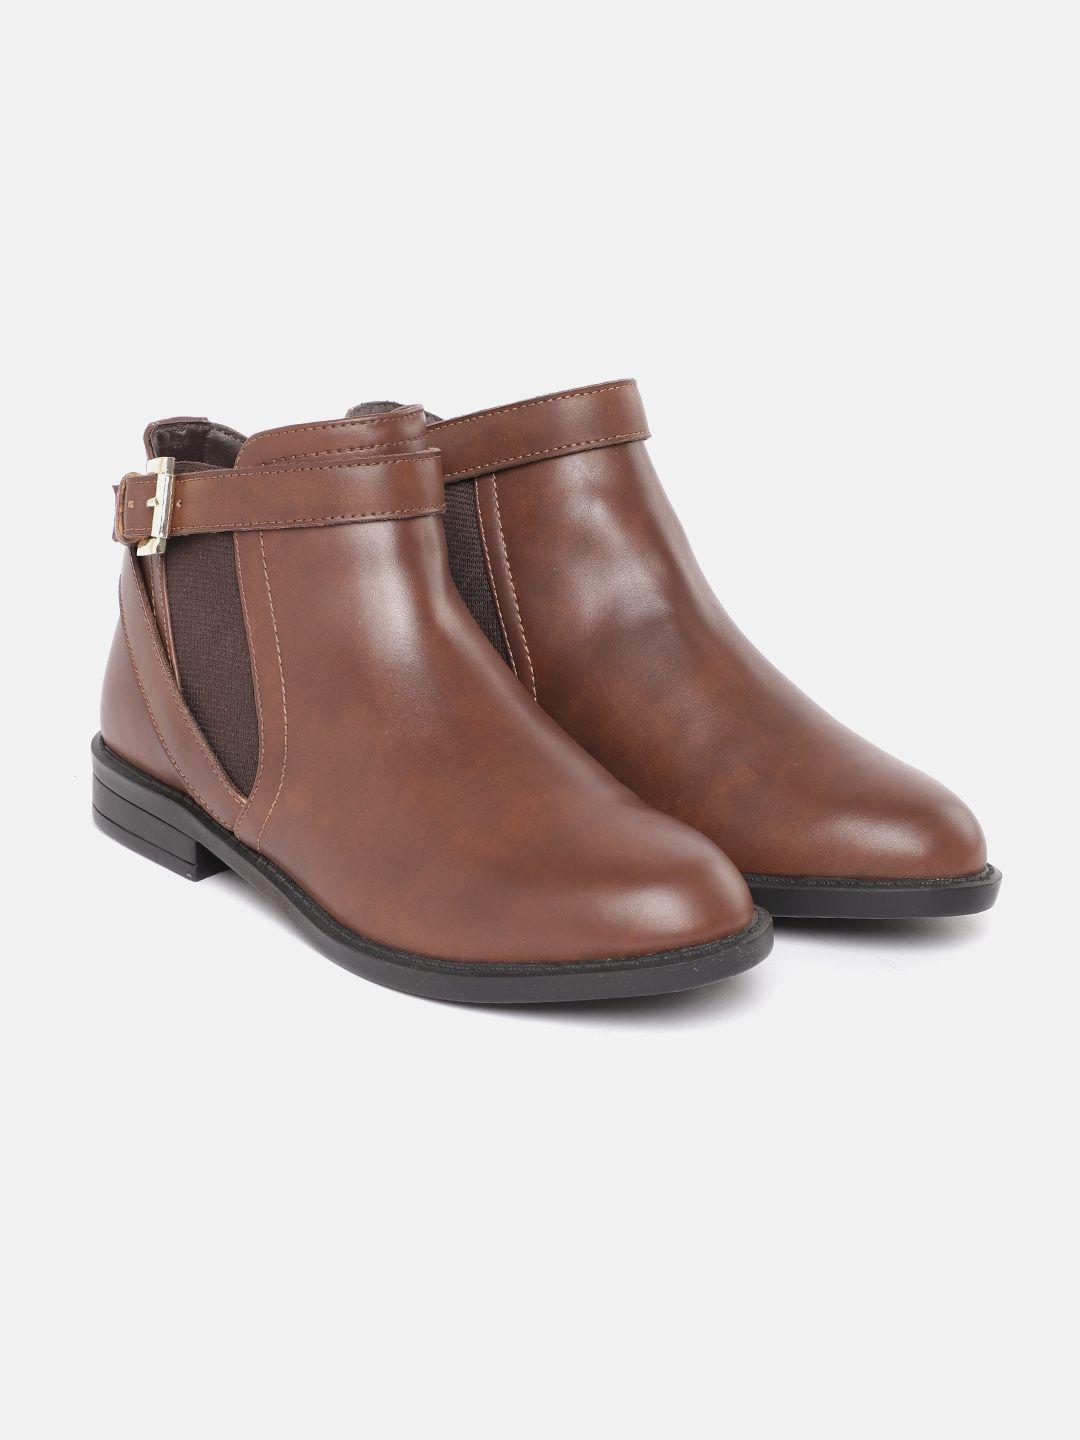 carlton london women brown solid mid-top chelsea boots